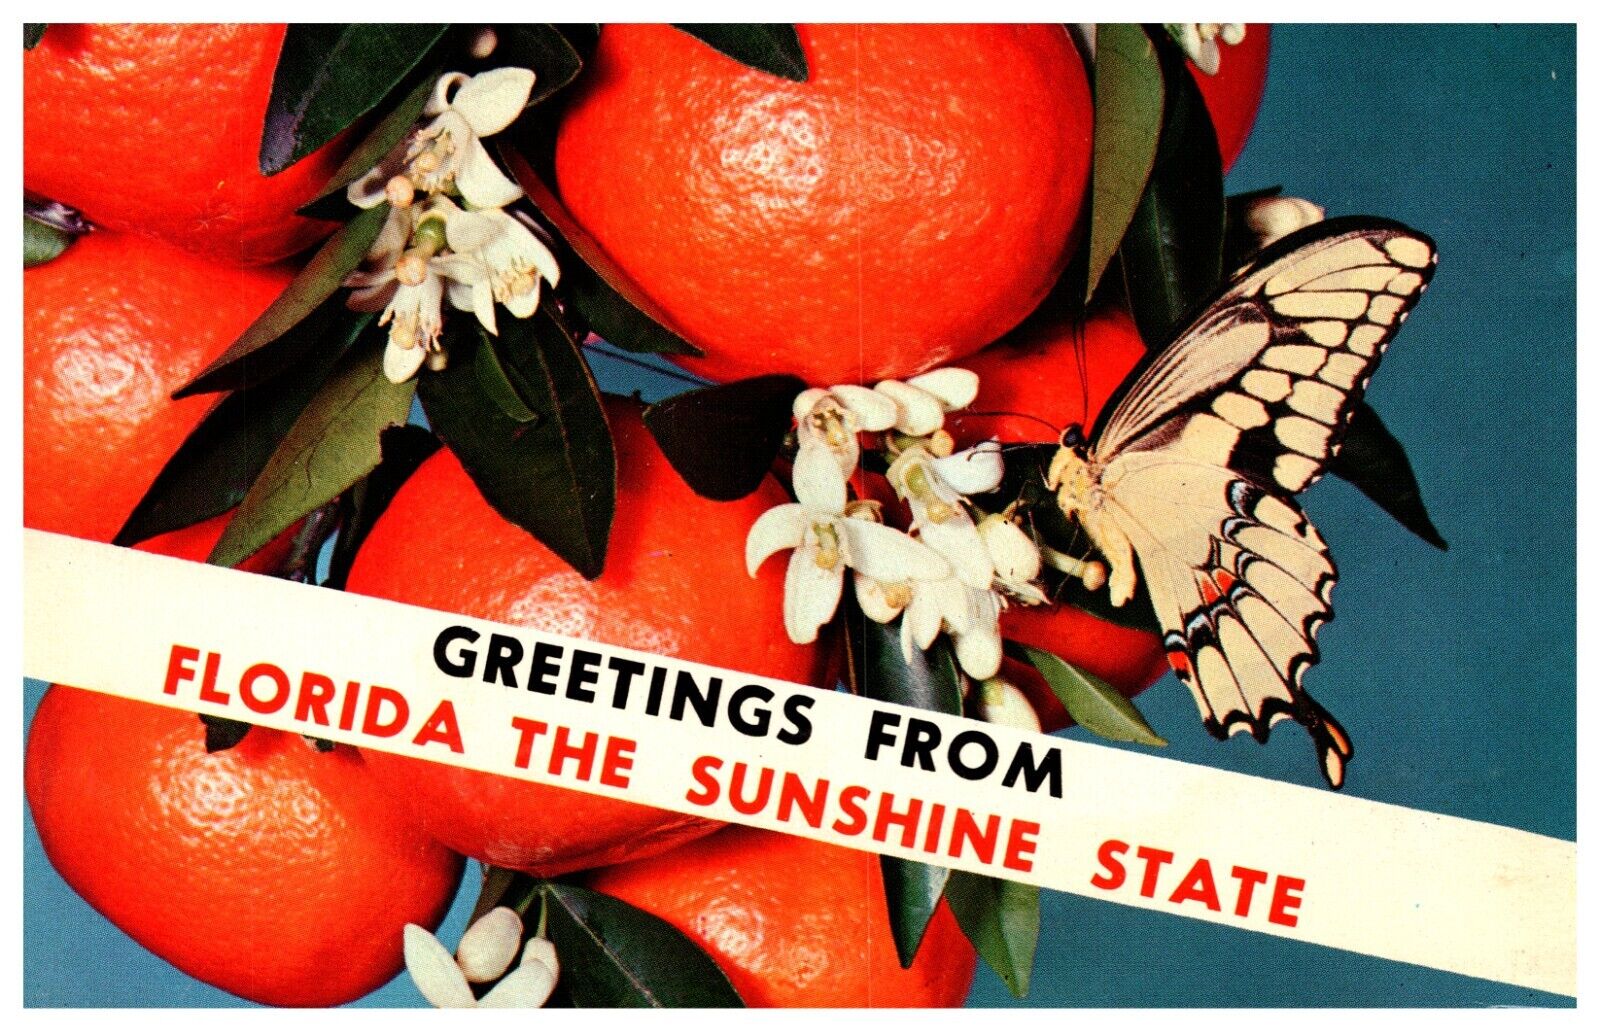 Greetings From the Sunshine State Giant Swallowtail Butterfly Vintage Postcard